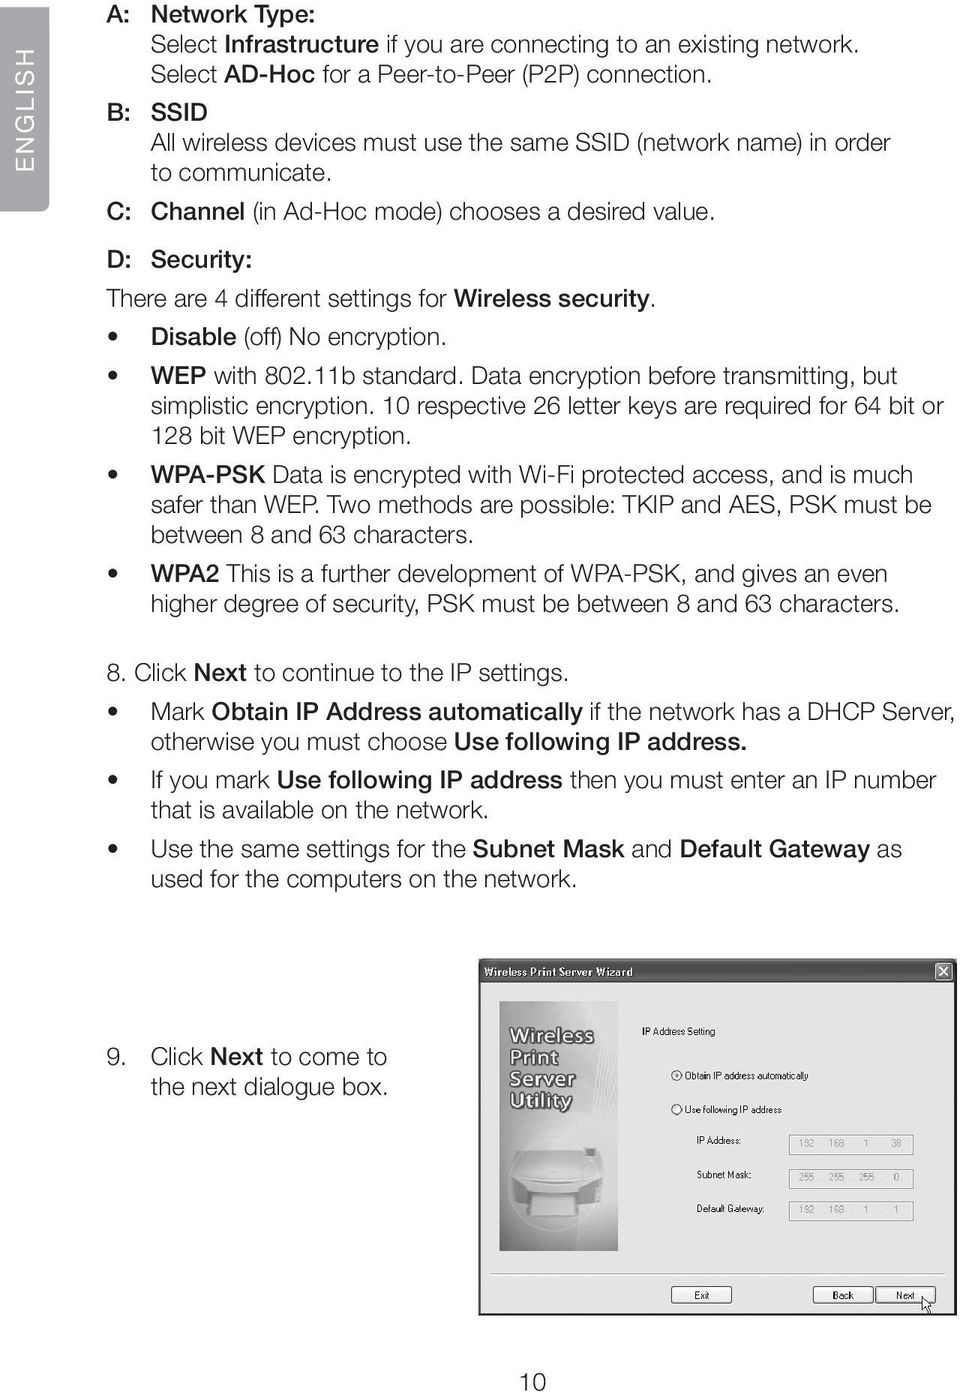 D: Security: There are 4 different settings for Wireless security. Disable (off) No encryption. WEP with 802.11b standard. Data encryption before transmitting, but simplistic encryption.